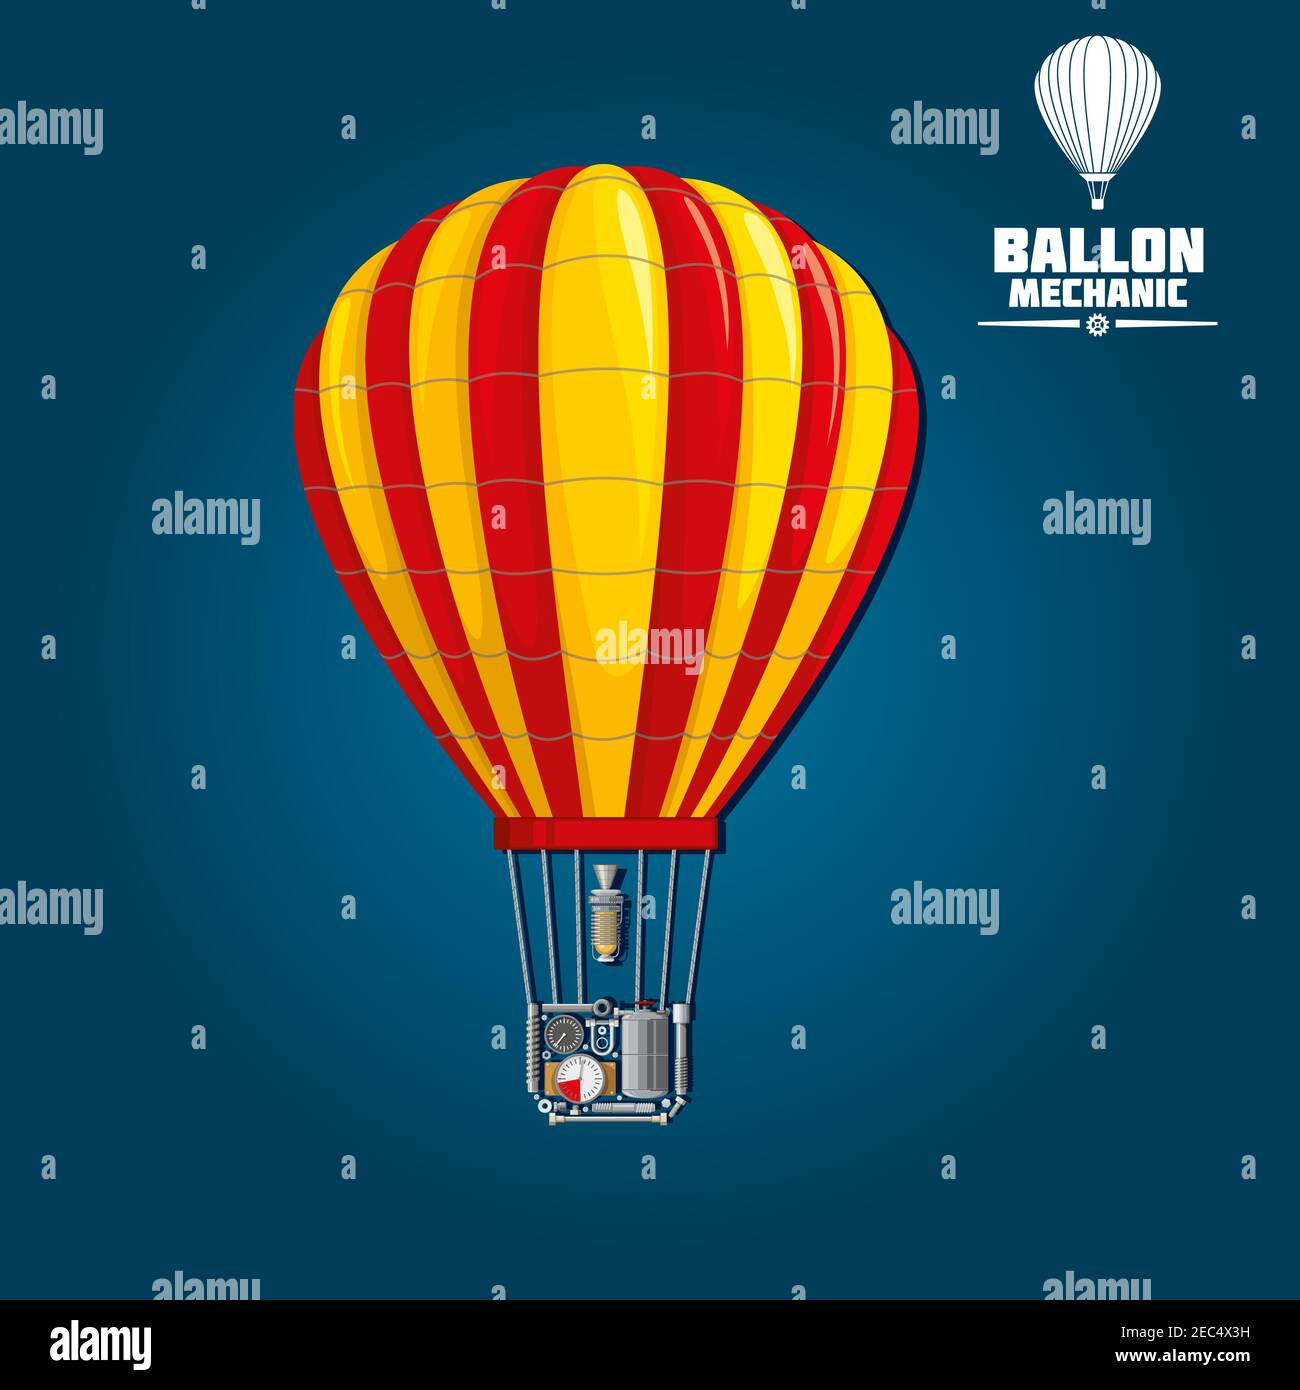 Hot air balloon with stripped envelope isolated on blue. Detailed mechanics of nylon or dacron envelope, parachute vent and burner, fuel tank and its Stock Vector